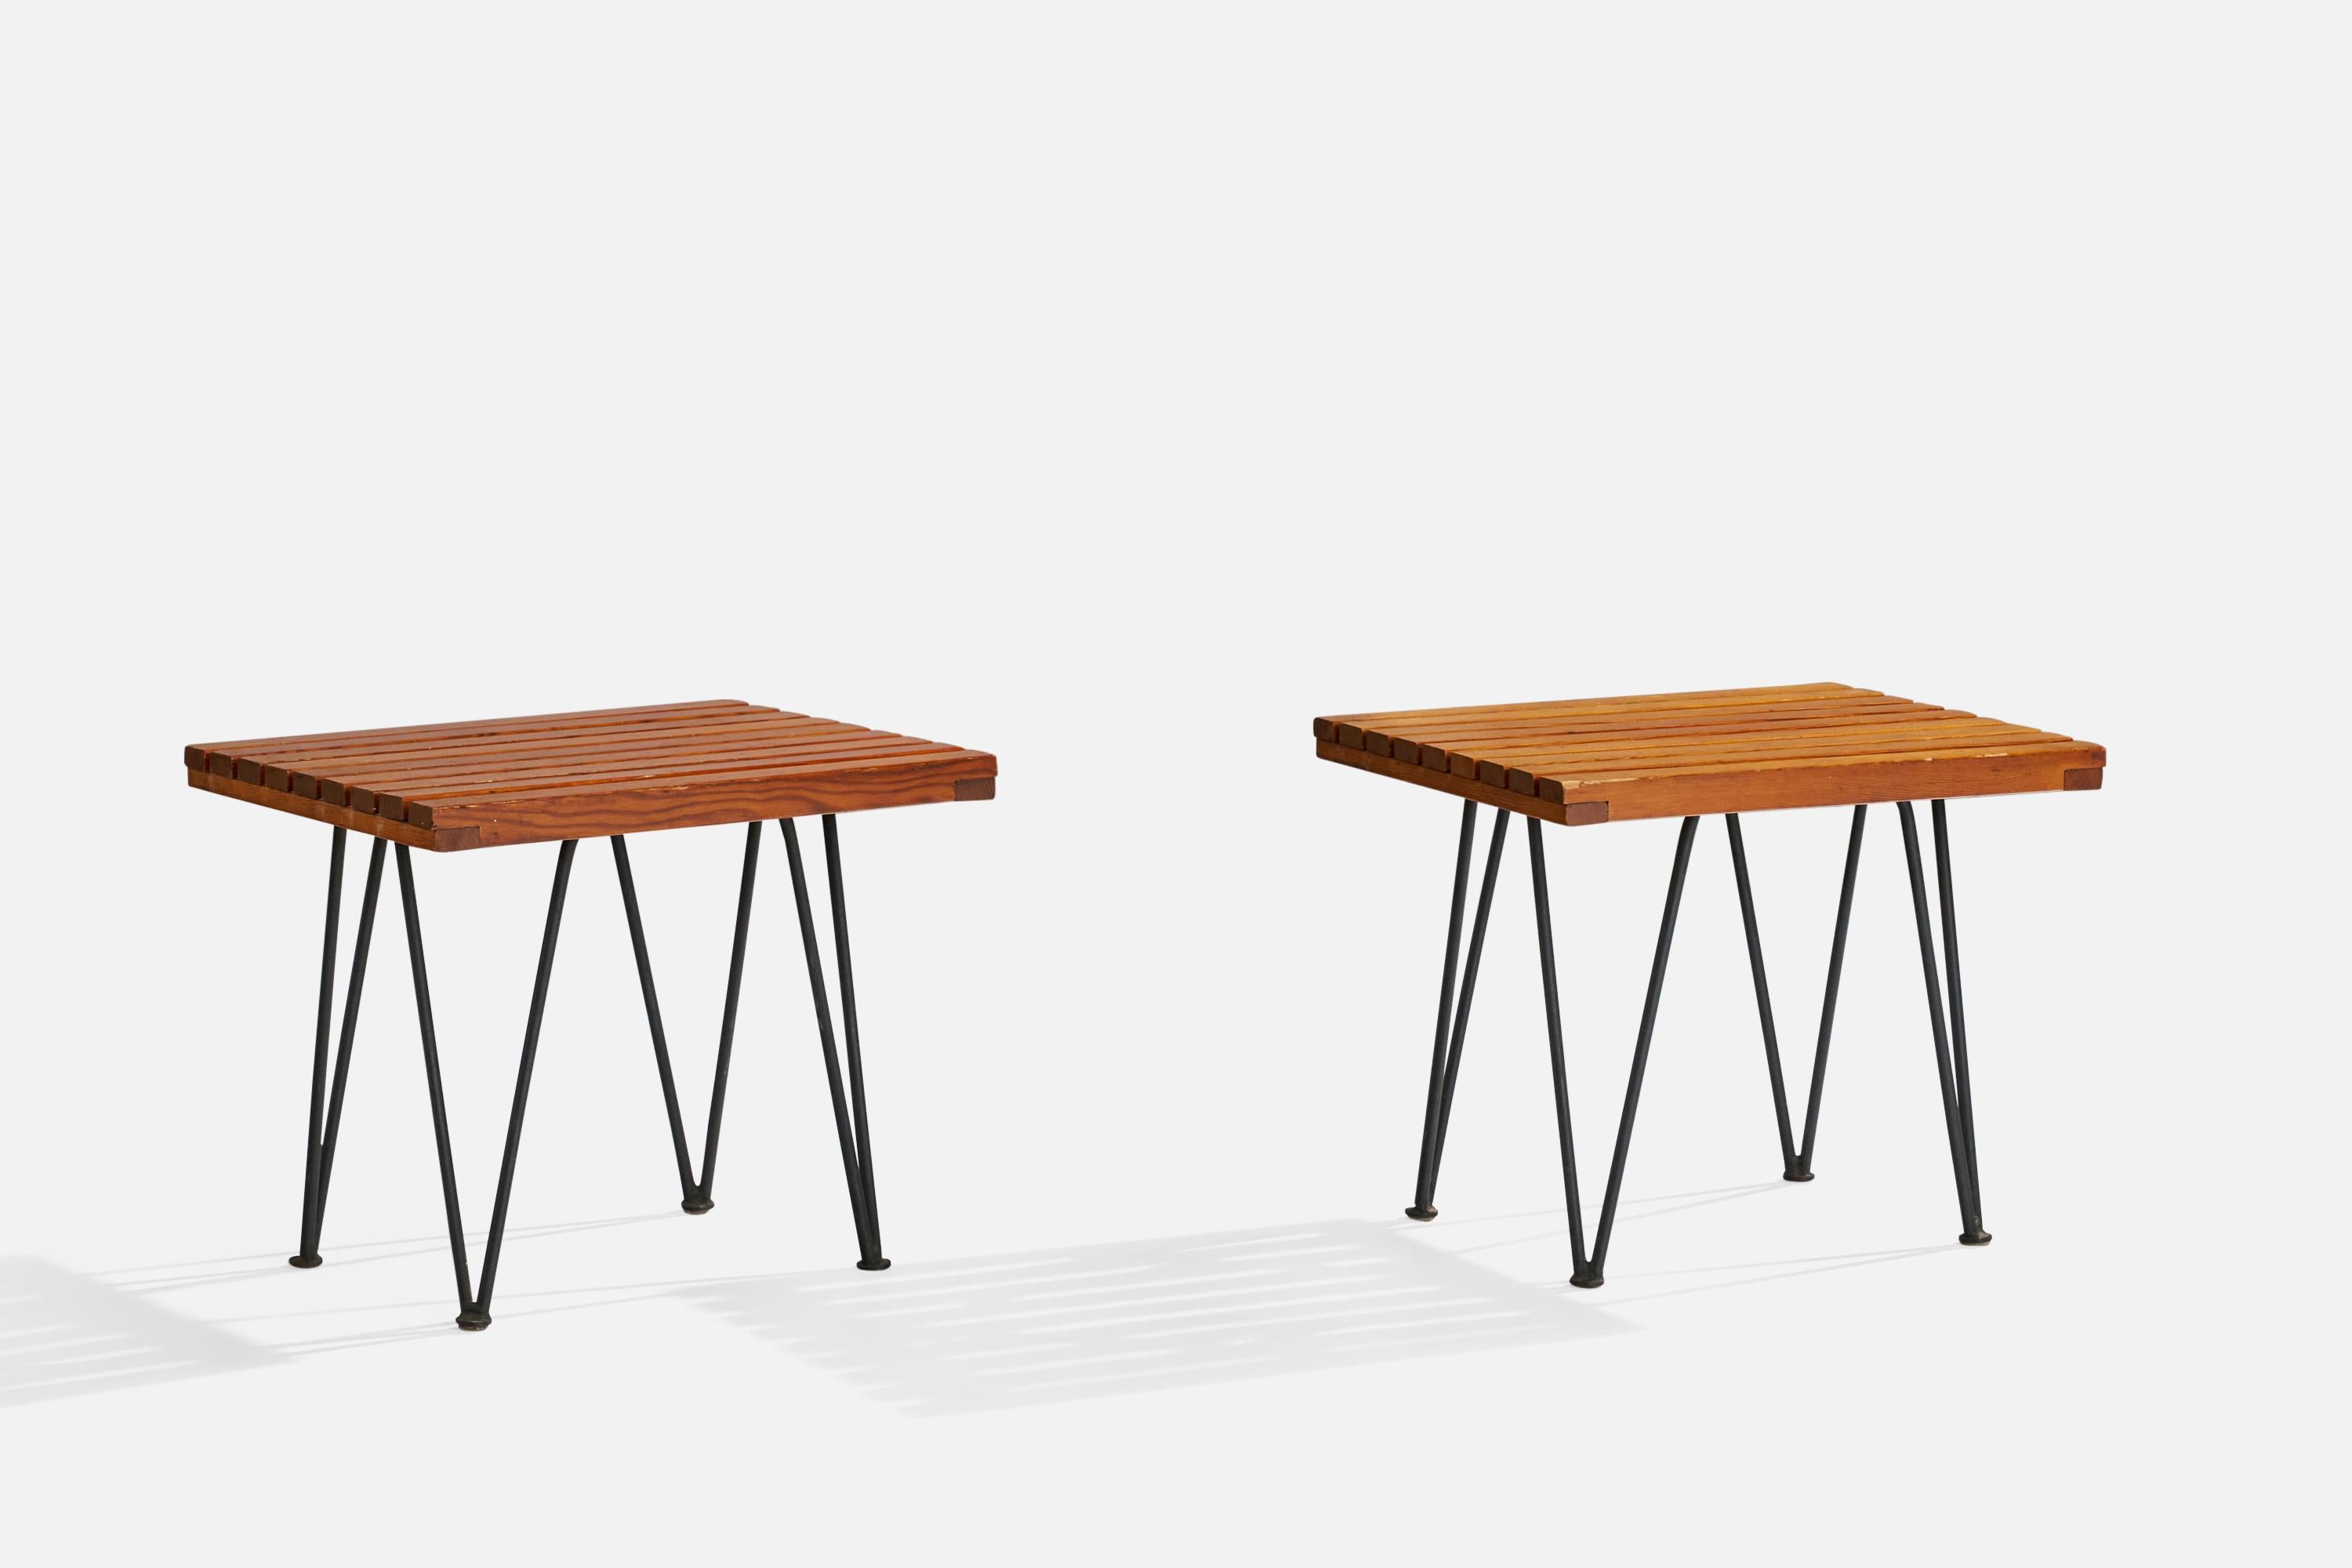 A pair of side tables or benches designed by Pipsan Saarinen Swanson & J. Robert F. Swanson and produced by Ficks Reed Company, Cincinnati in 1949.
 